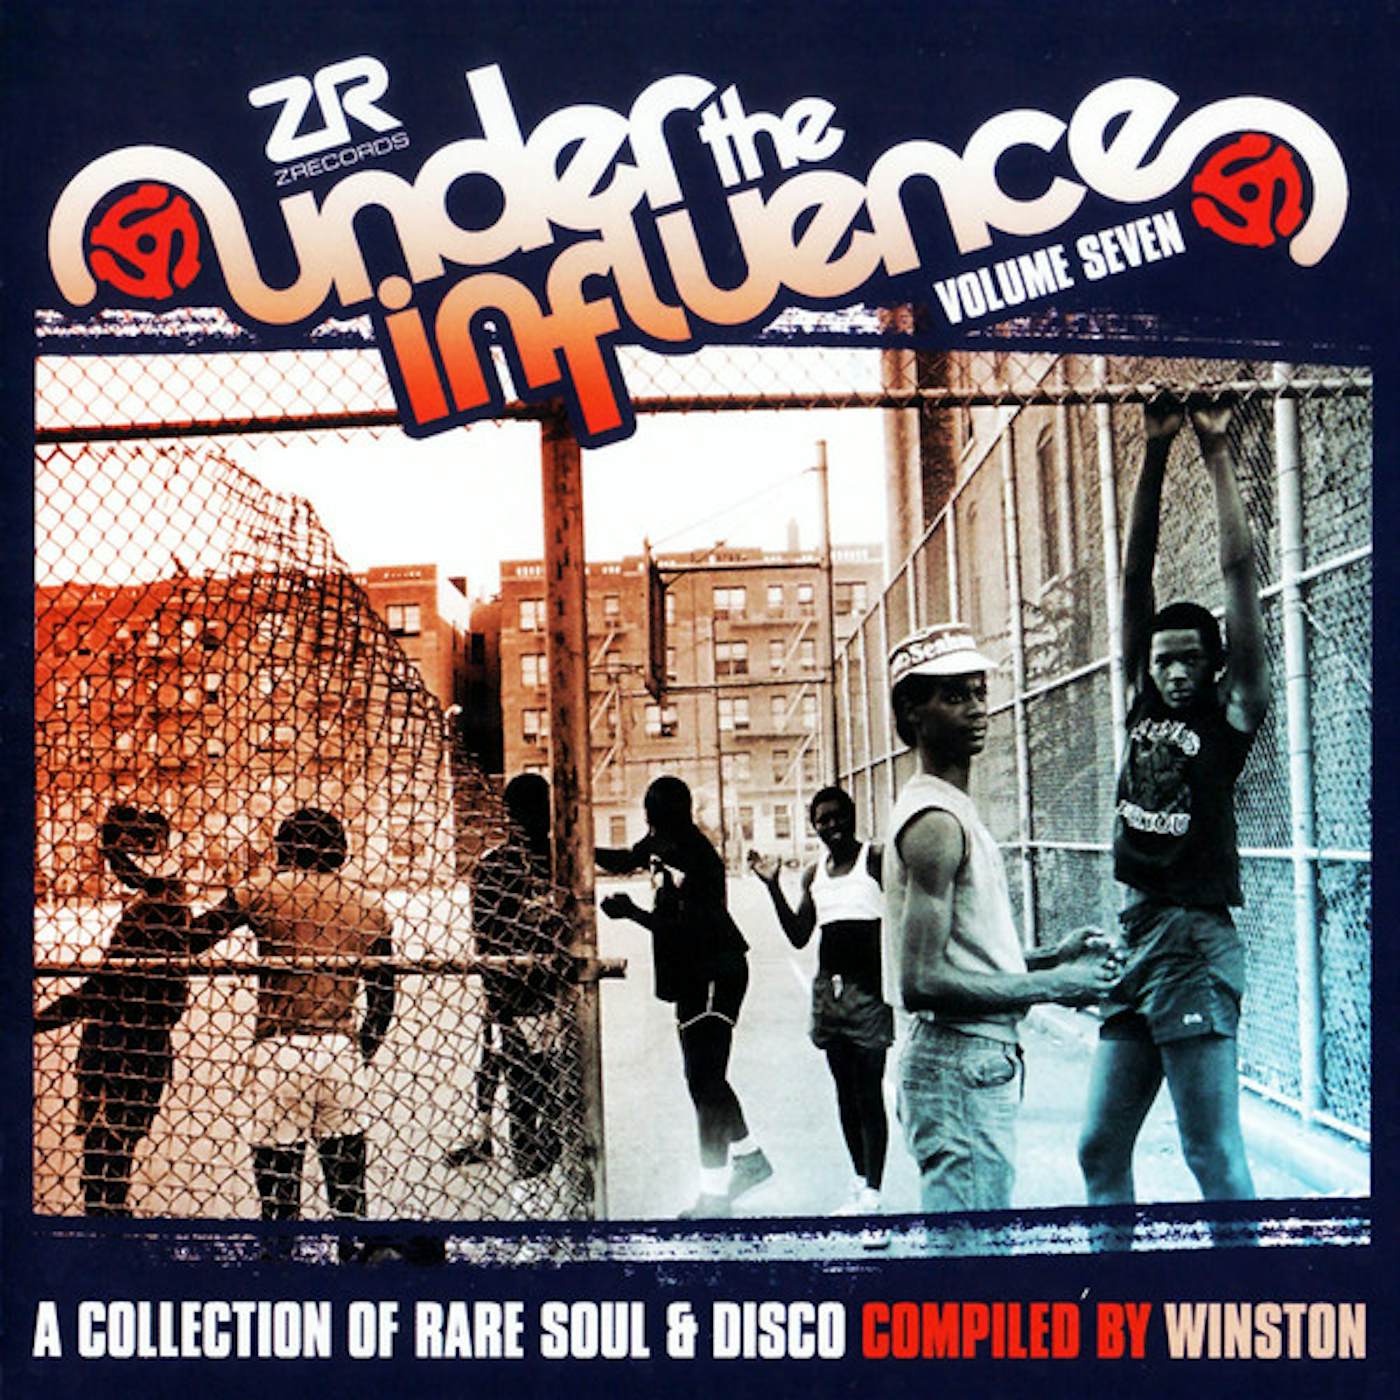 Winston Under The Influence Vol. 7: A Collection Of Rare Soul And Disco Vinyl Record